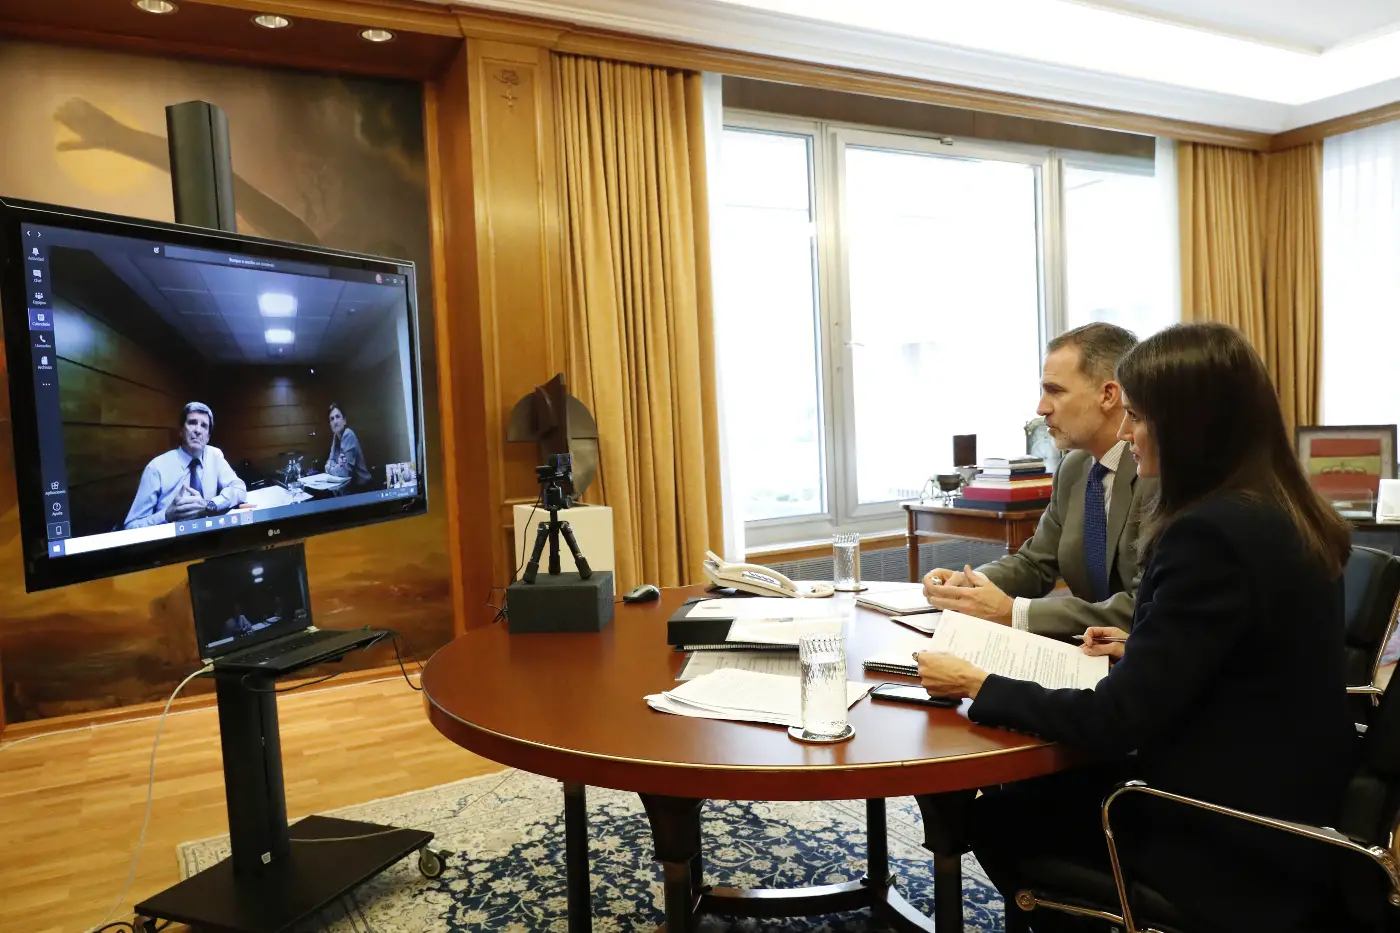 King Felipe and Queen Letizia held a virtual meeting with the president of the Valencia Port Authority